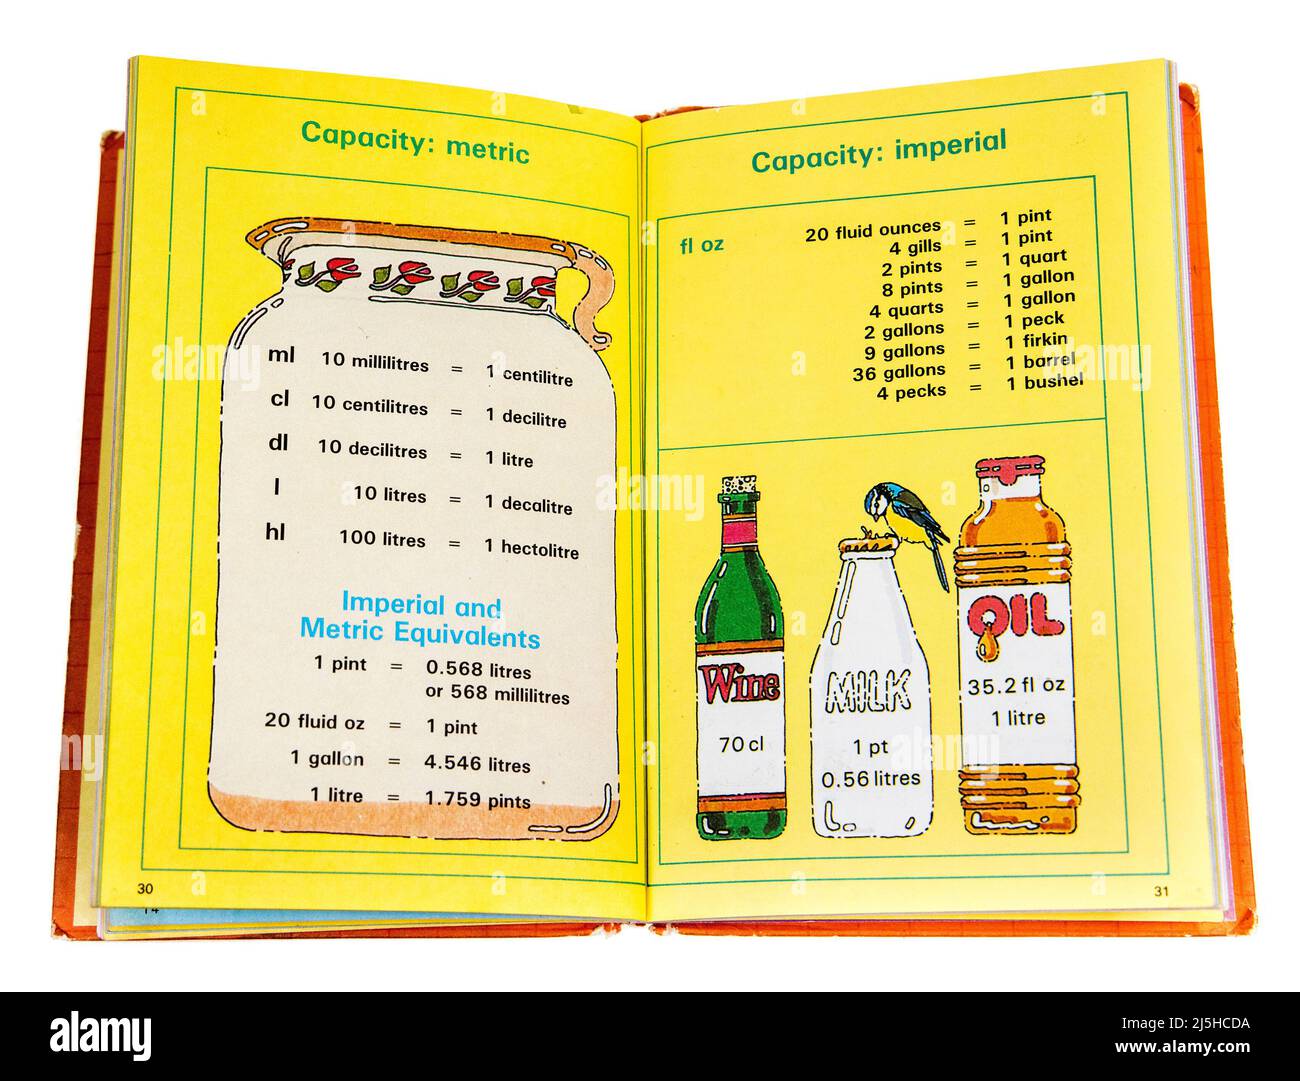 The Ladybird Book of Tables, arithmetic teaching aid for children, with measures in imperial and metric, UK Stock Photo